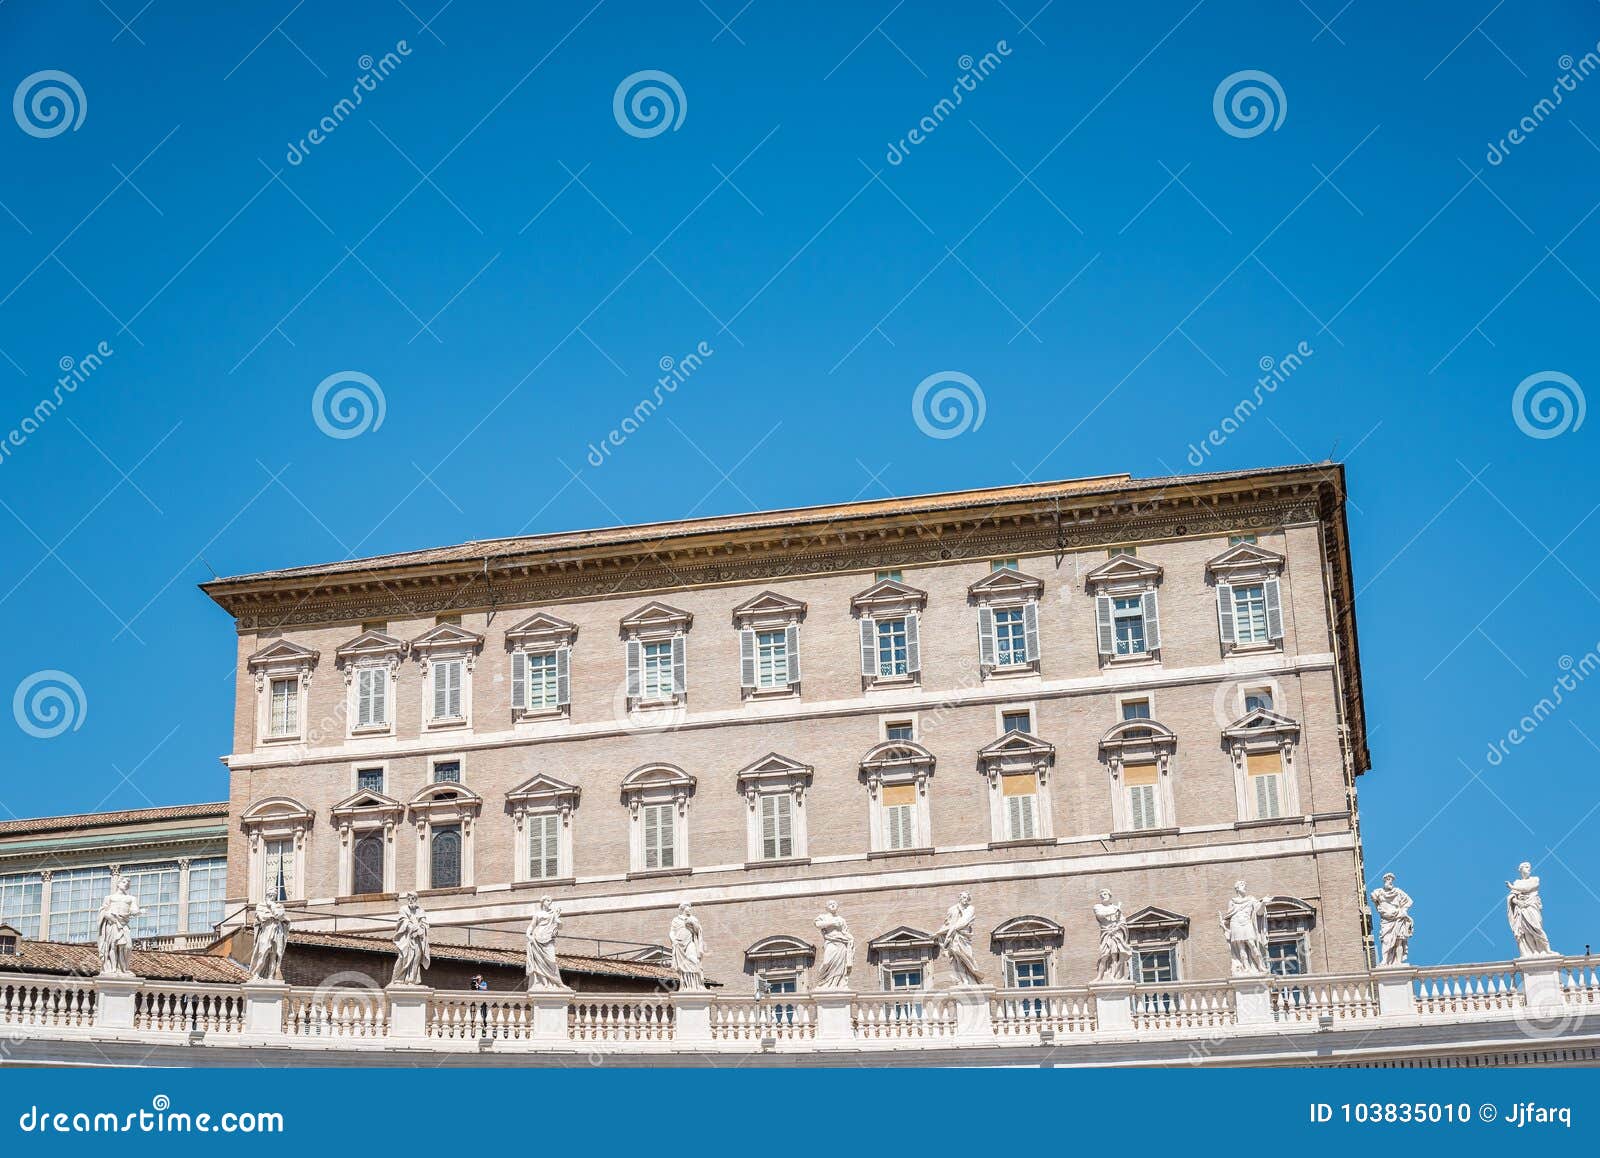 Apostolic Palace in the Vatican from the Square Editorial Image - Image ...